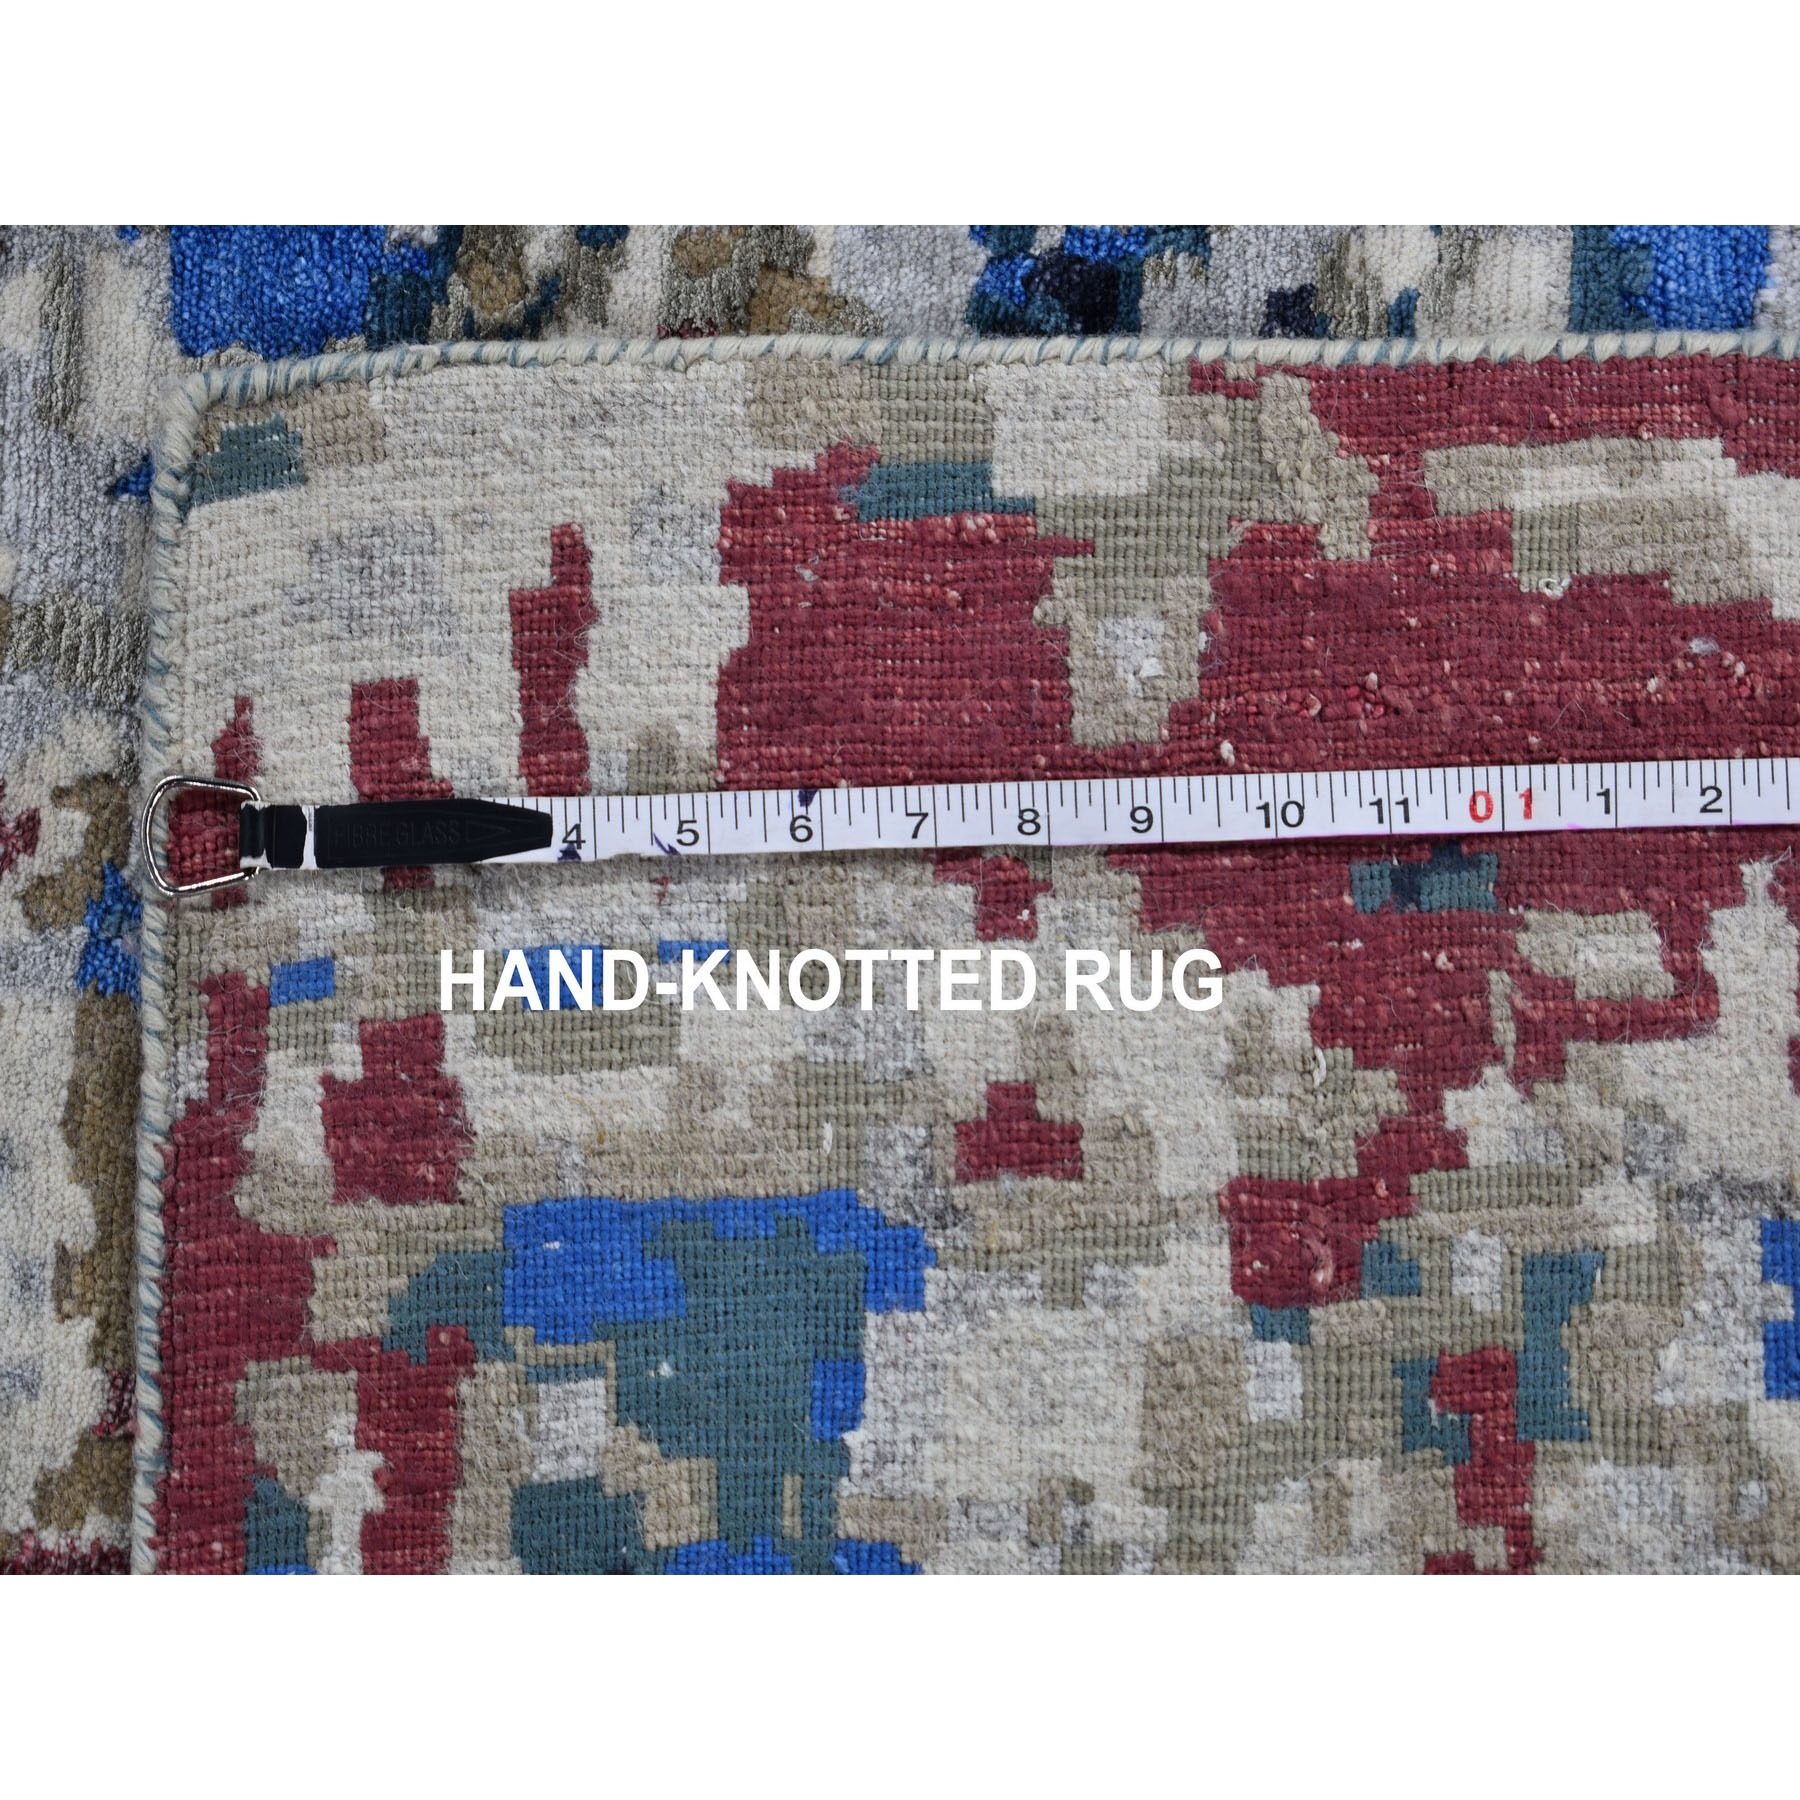 9-x12- Blue Abstract Design Wool And Silk Hand Knotted Oriental Rug 